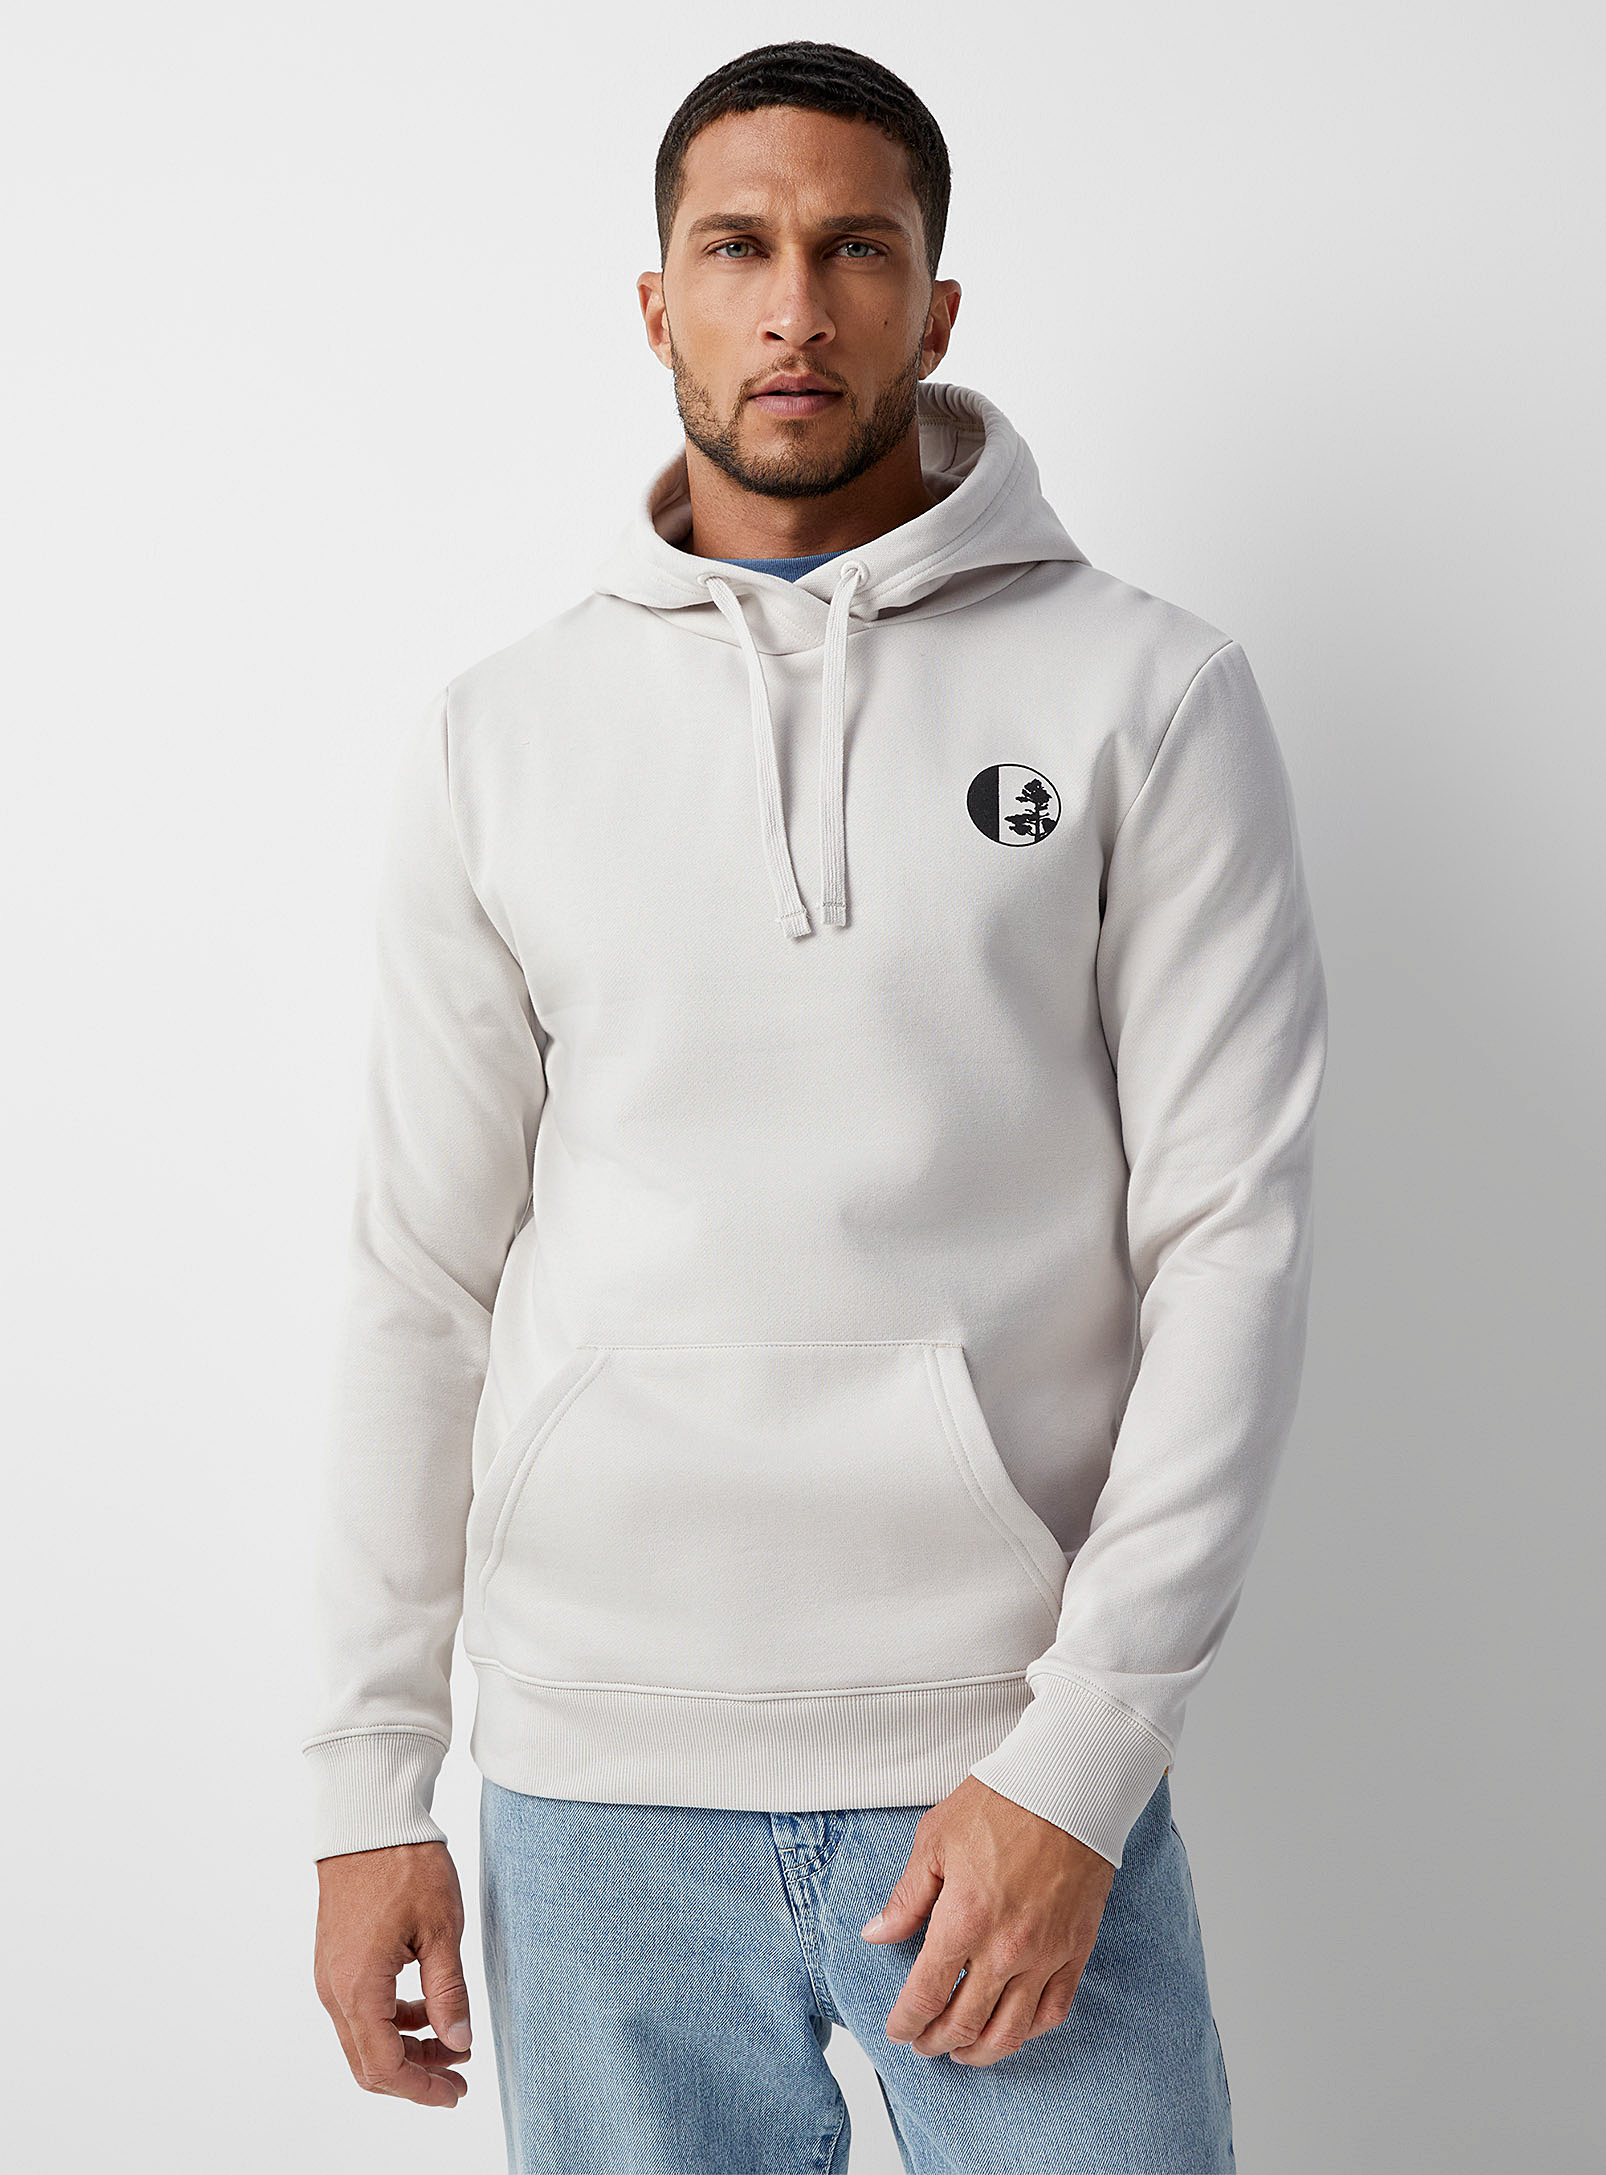 Tentree - Men's Front and back print hoodie